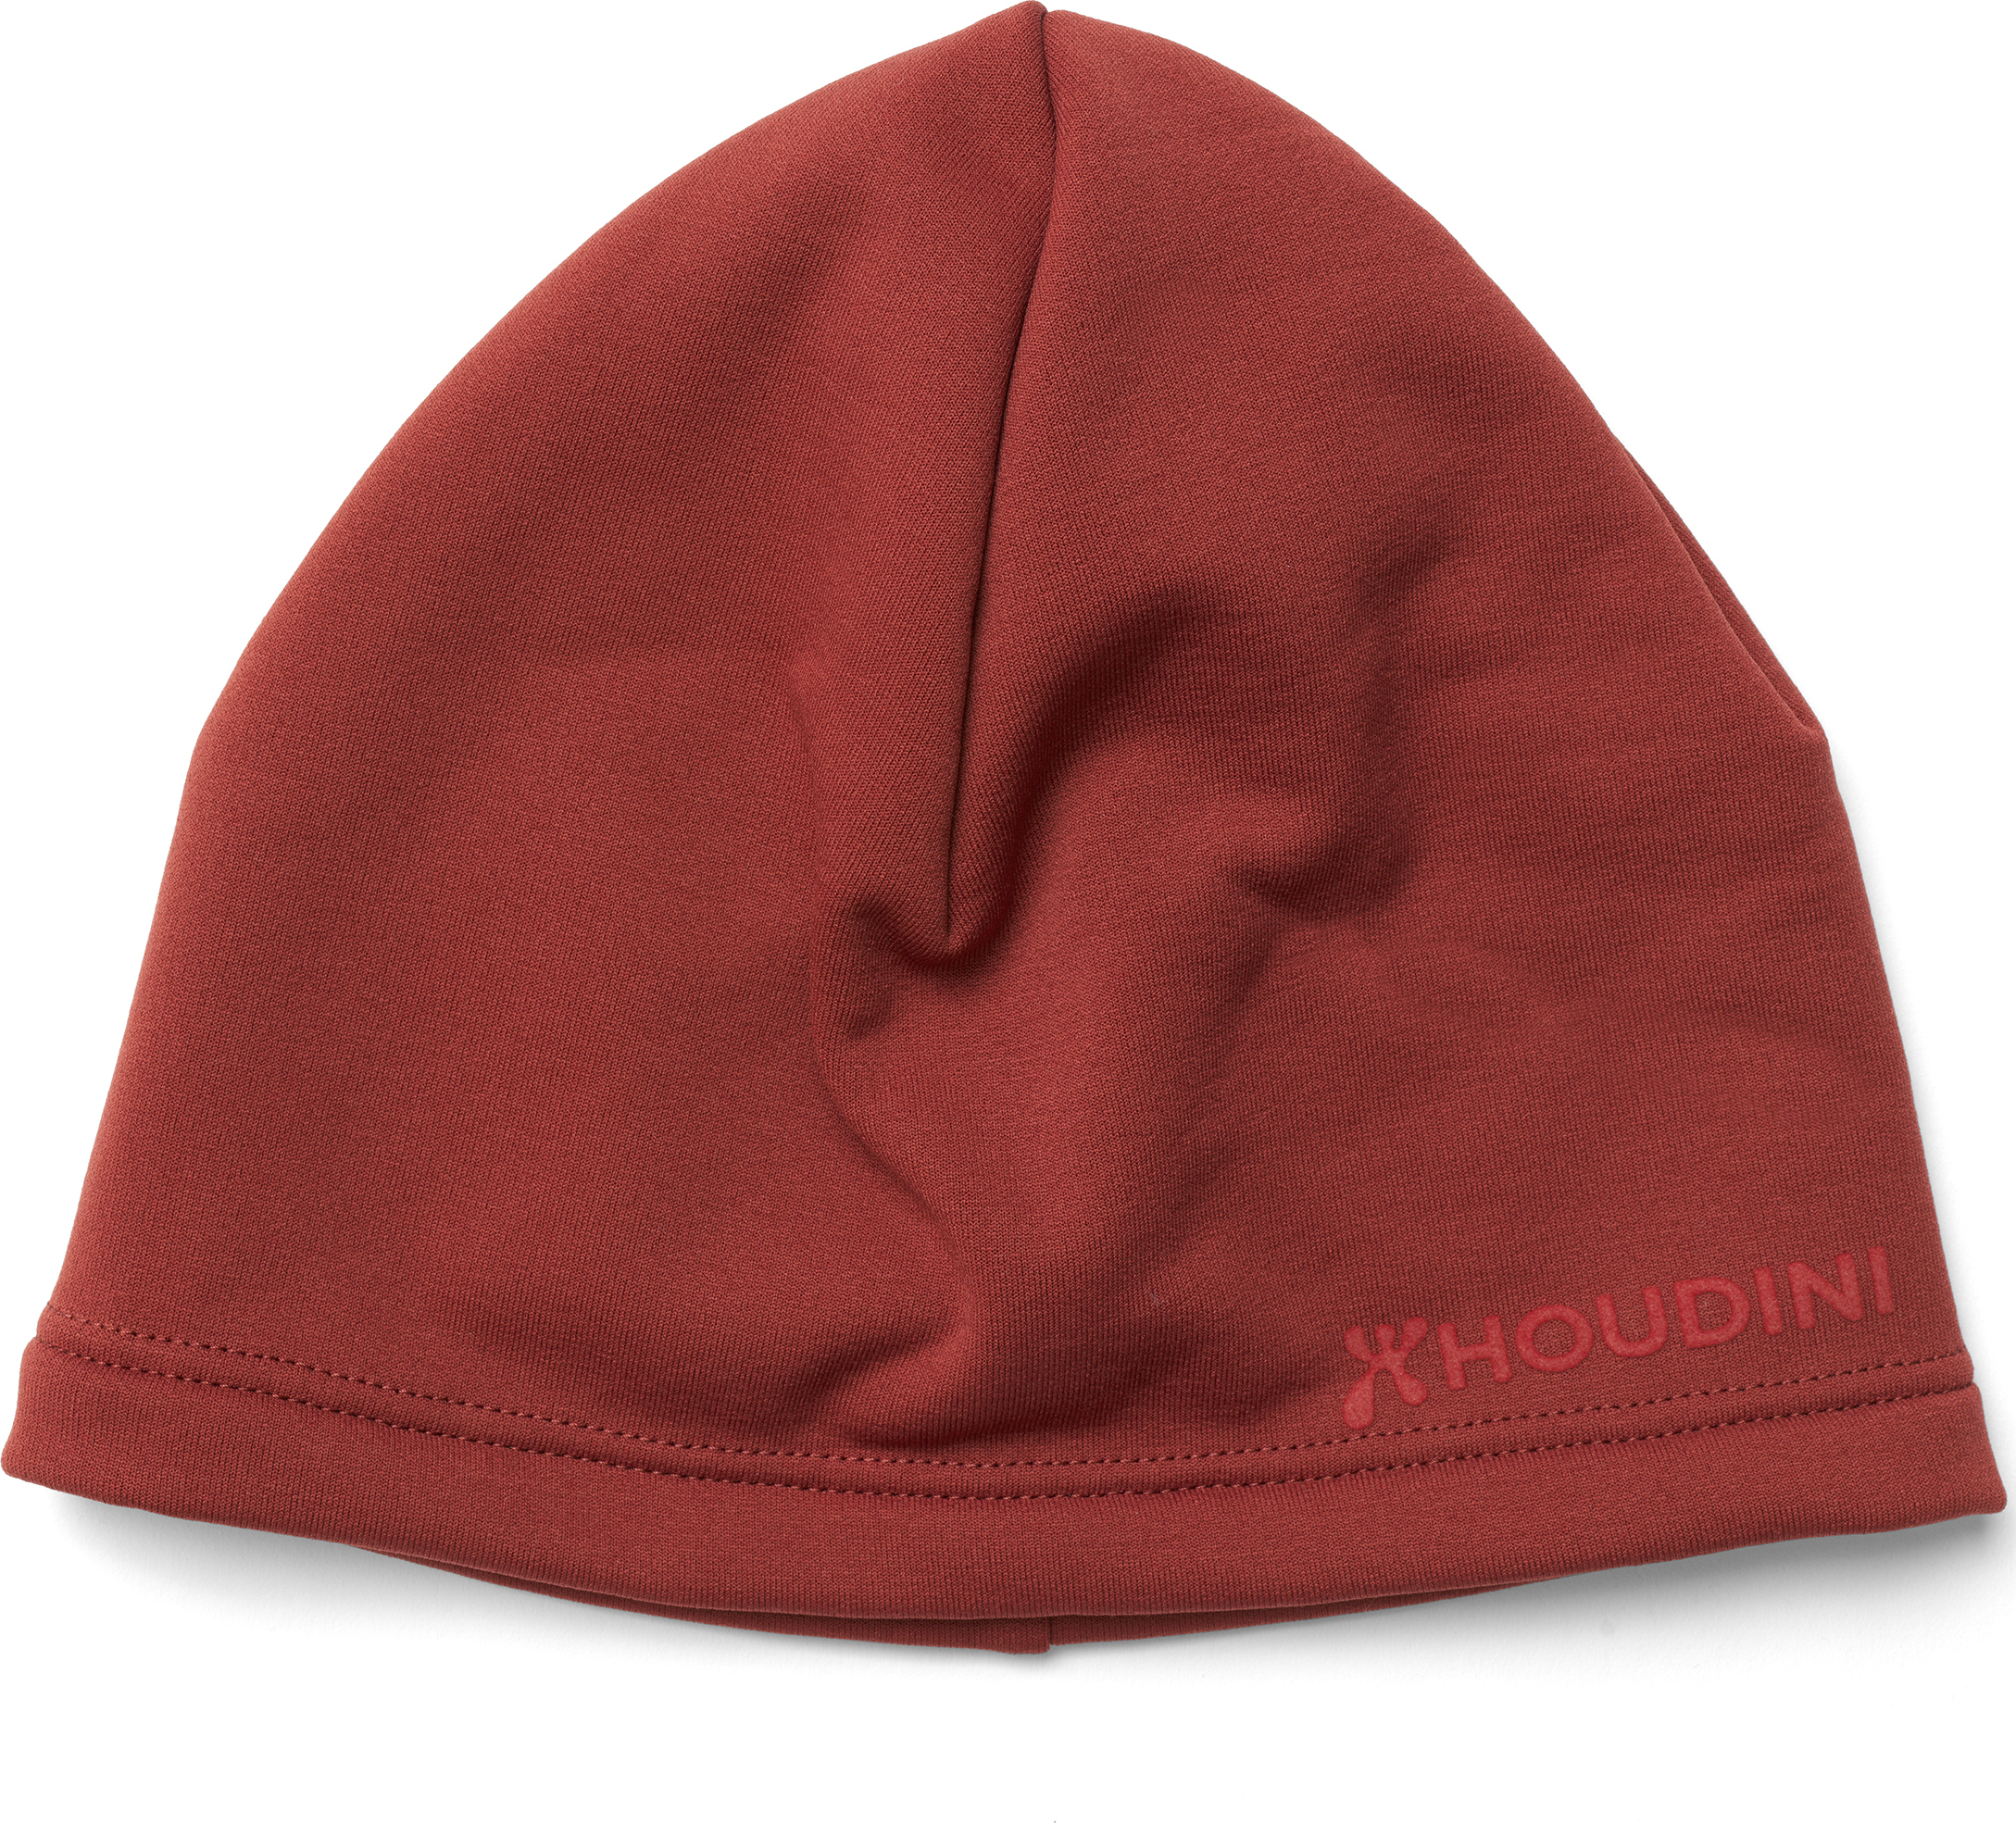 Houdini Power Top Hat Deep Red S, Deep Red